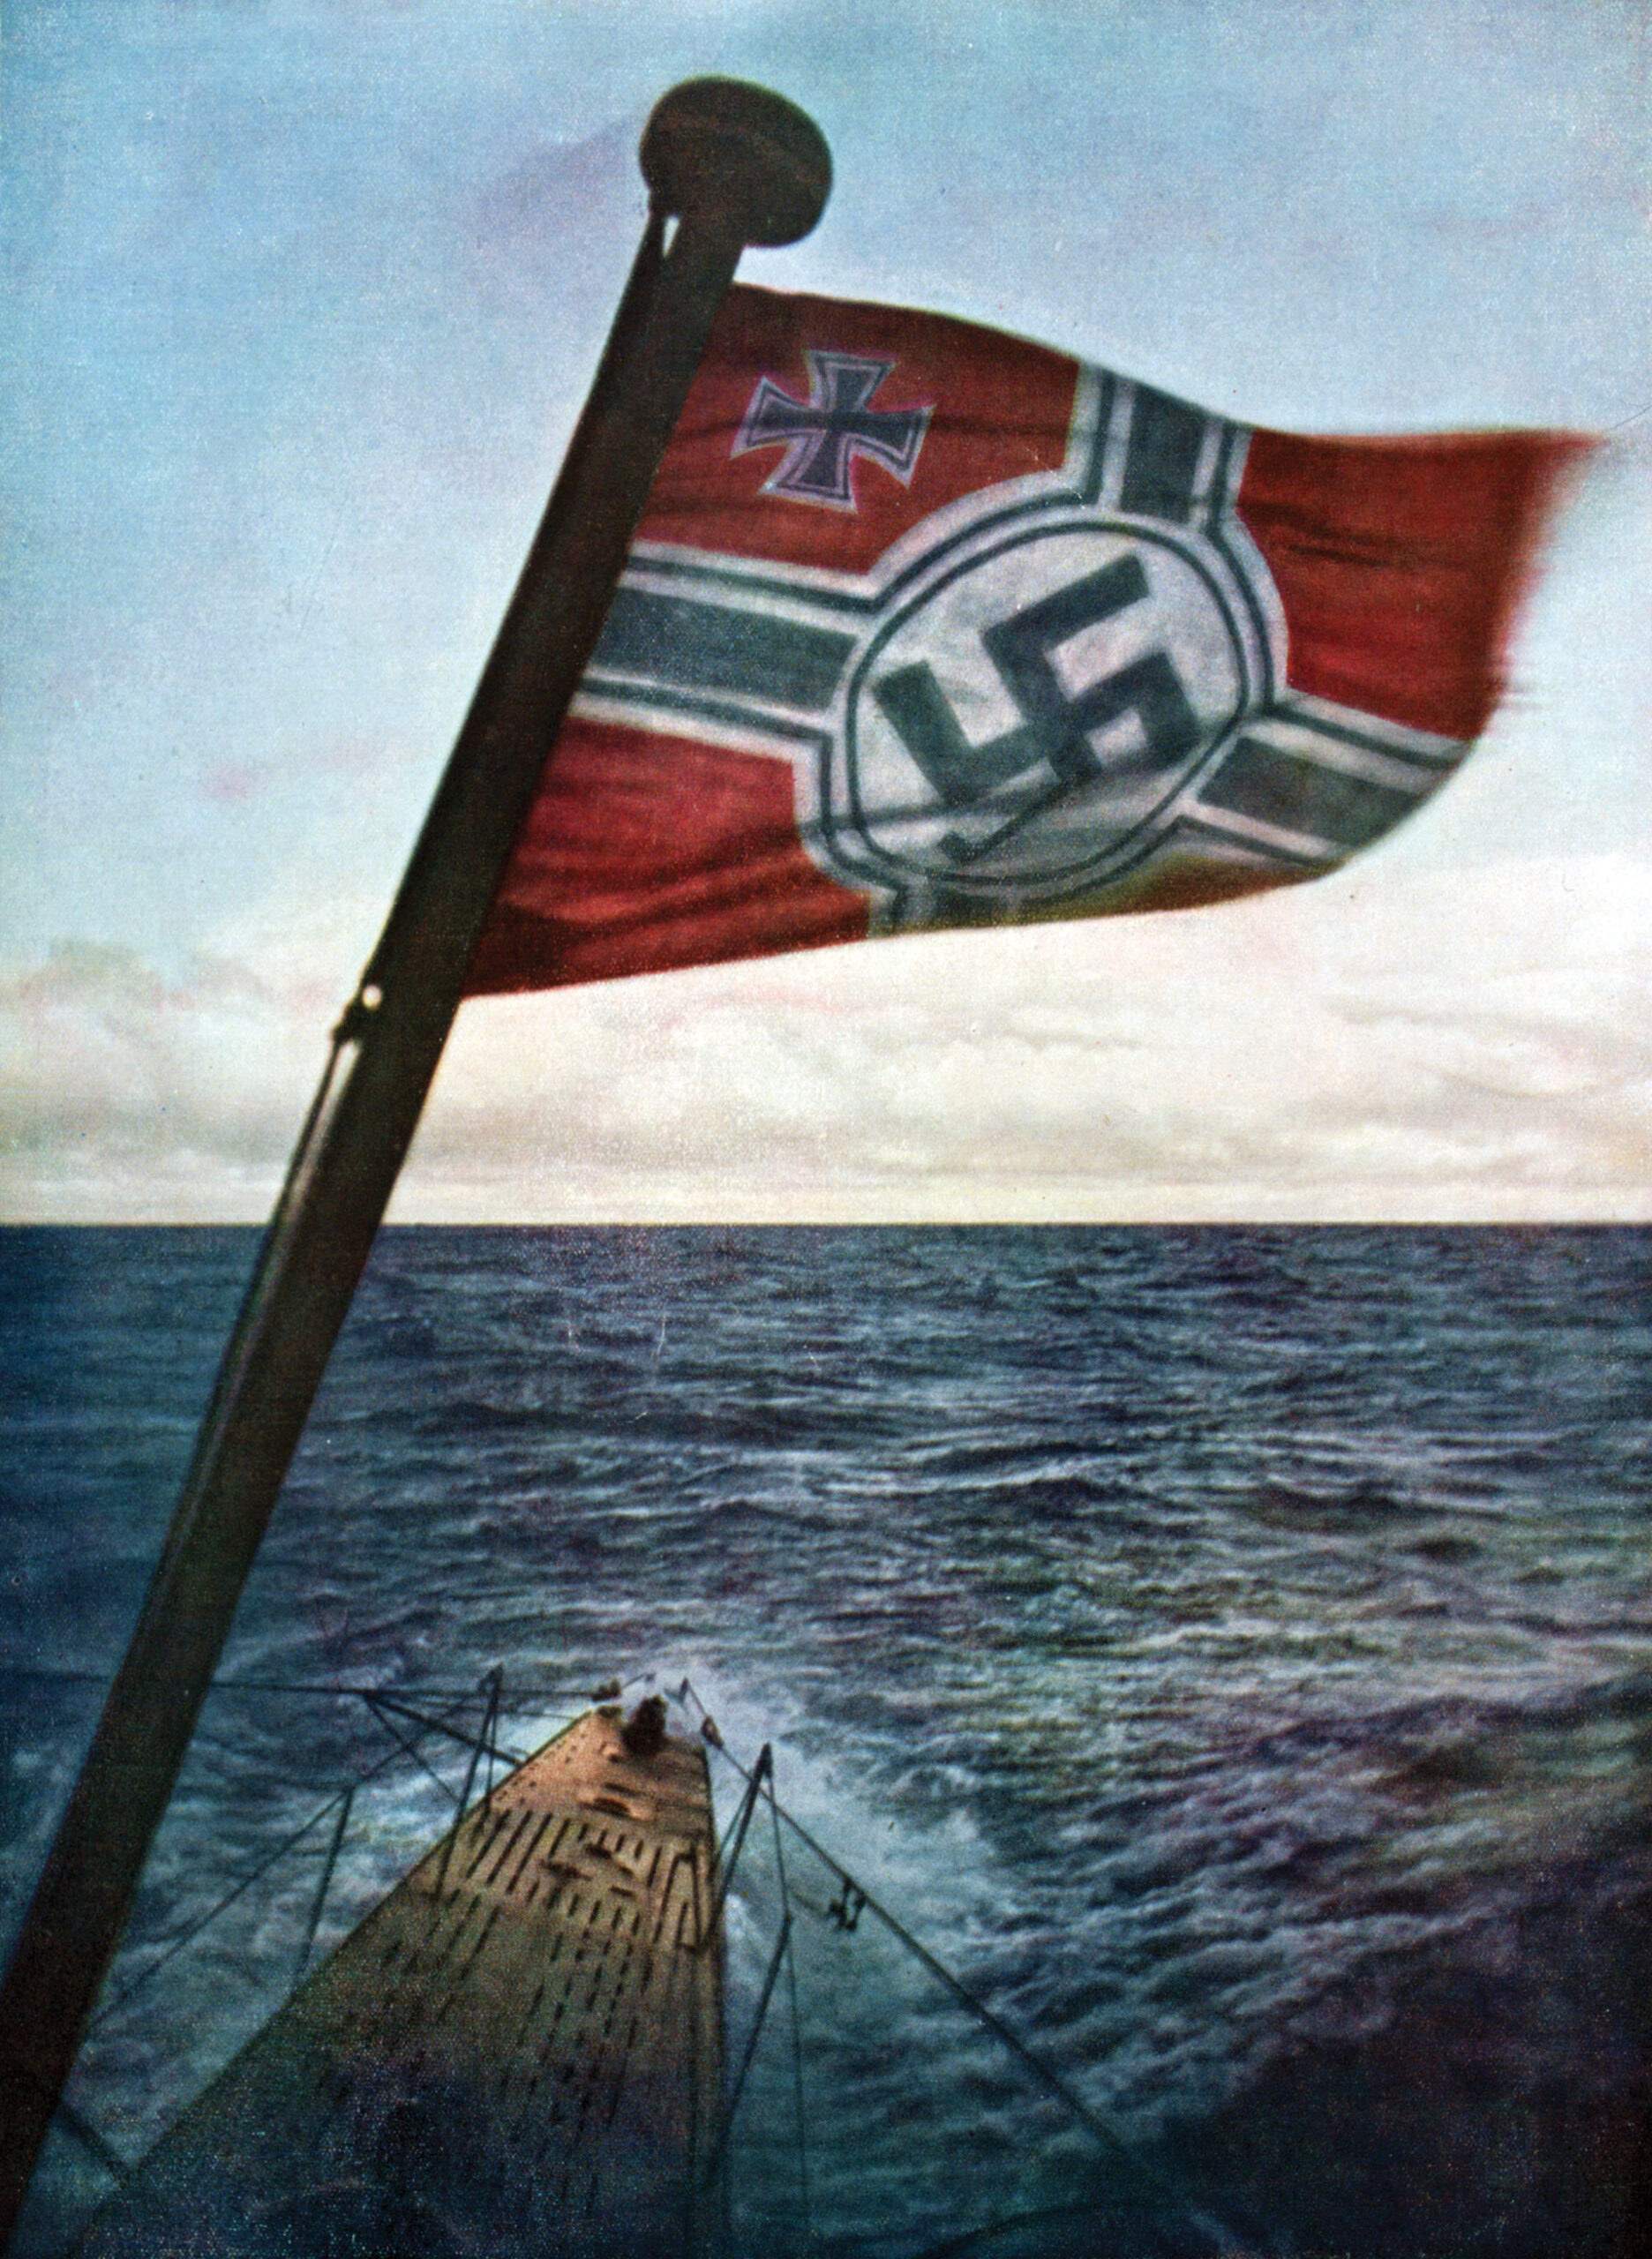 The swastika flag whips in the winds of the Atlantic Ocean from a surfaced Nazi U-boat. The U.S. Navy employed airships to combat the U-boat threat during World War II.